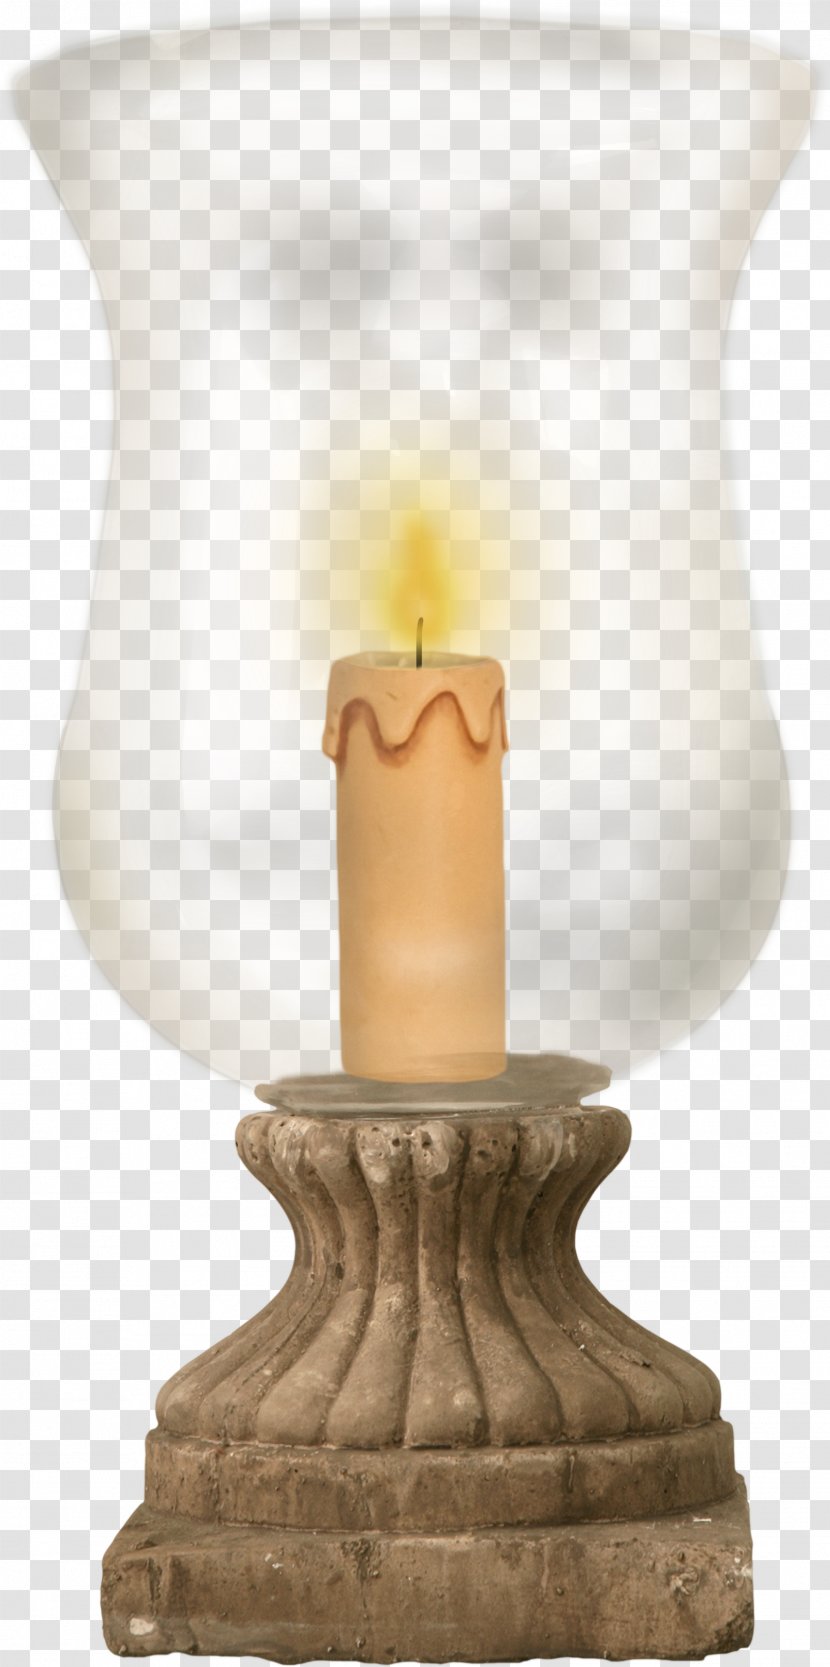 Light Candlestick Clip Art - Photography - Candle Holders Transparent PNG